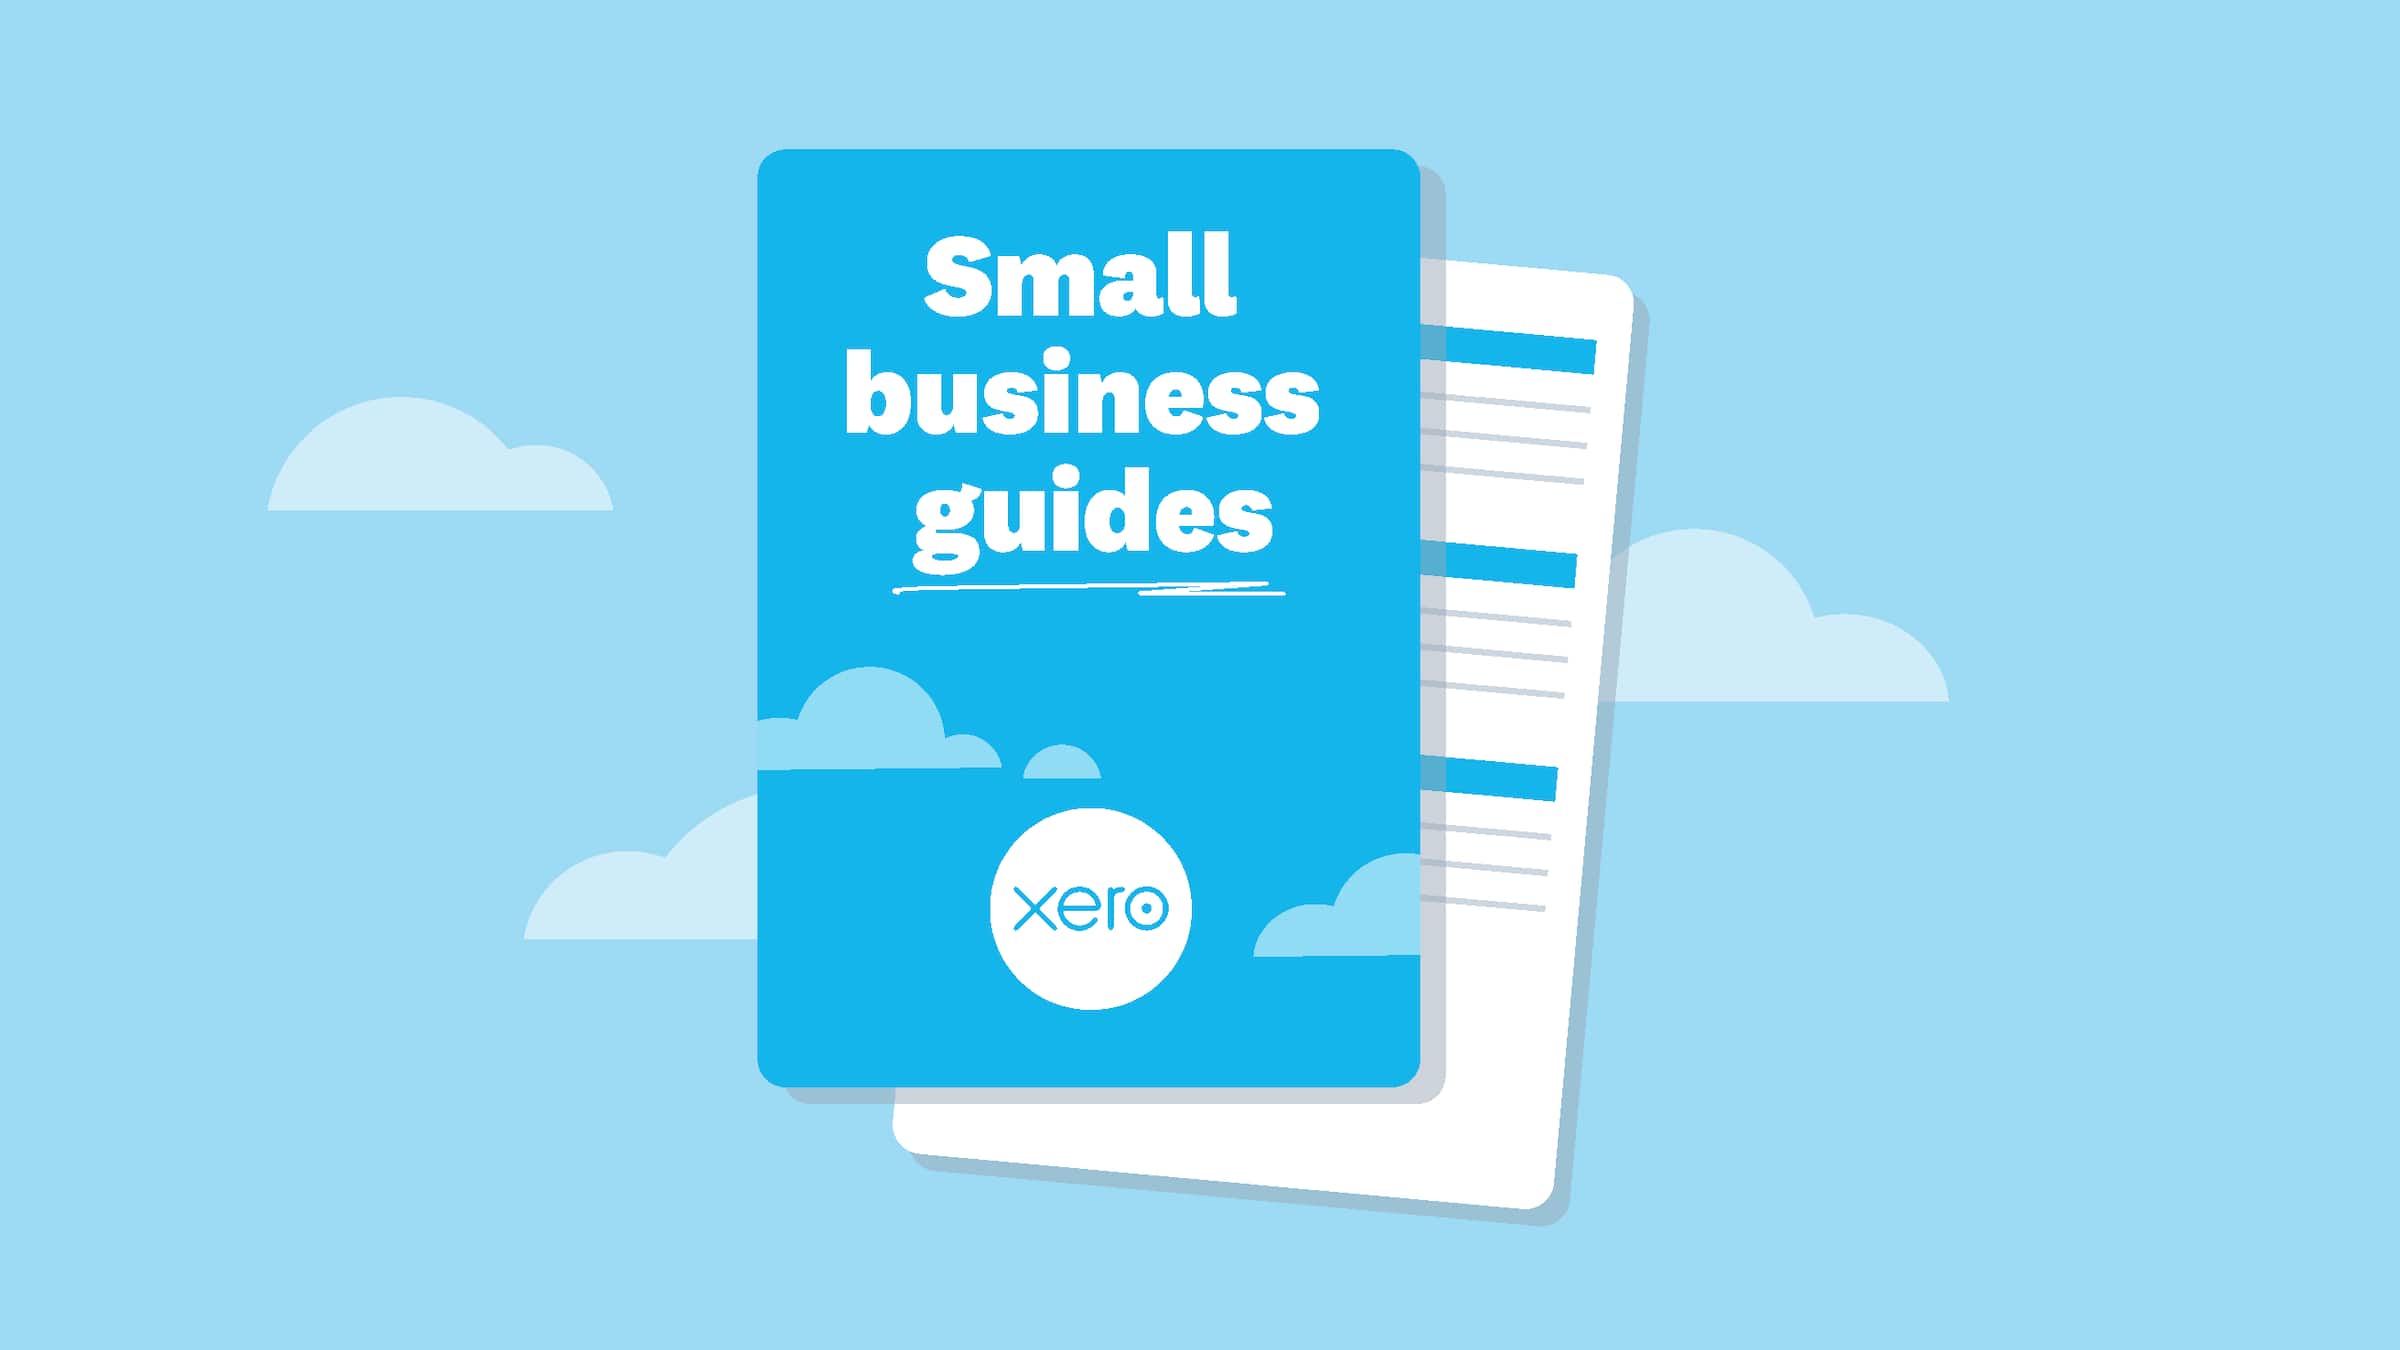 Papers labeled Small business guides